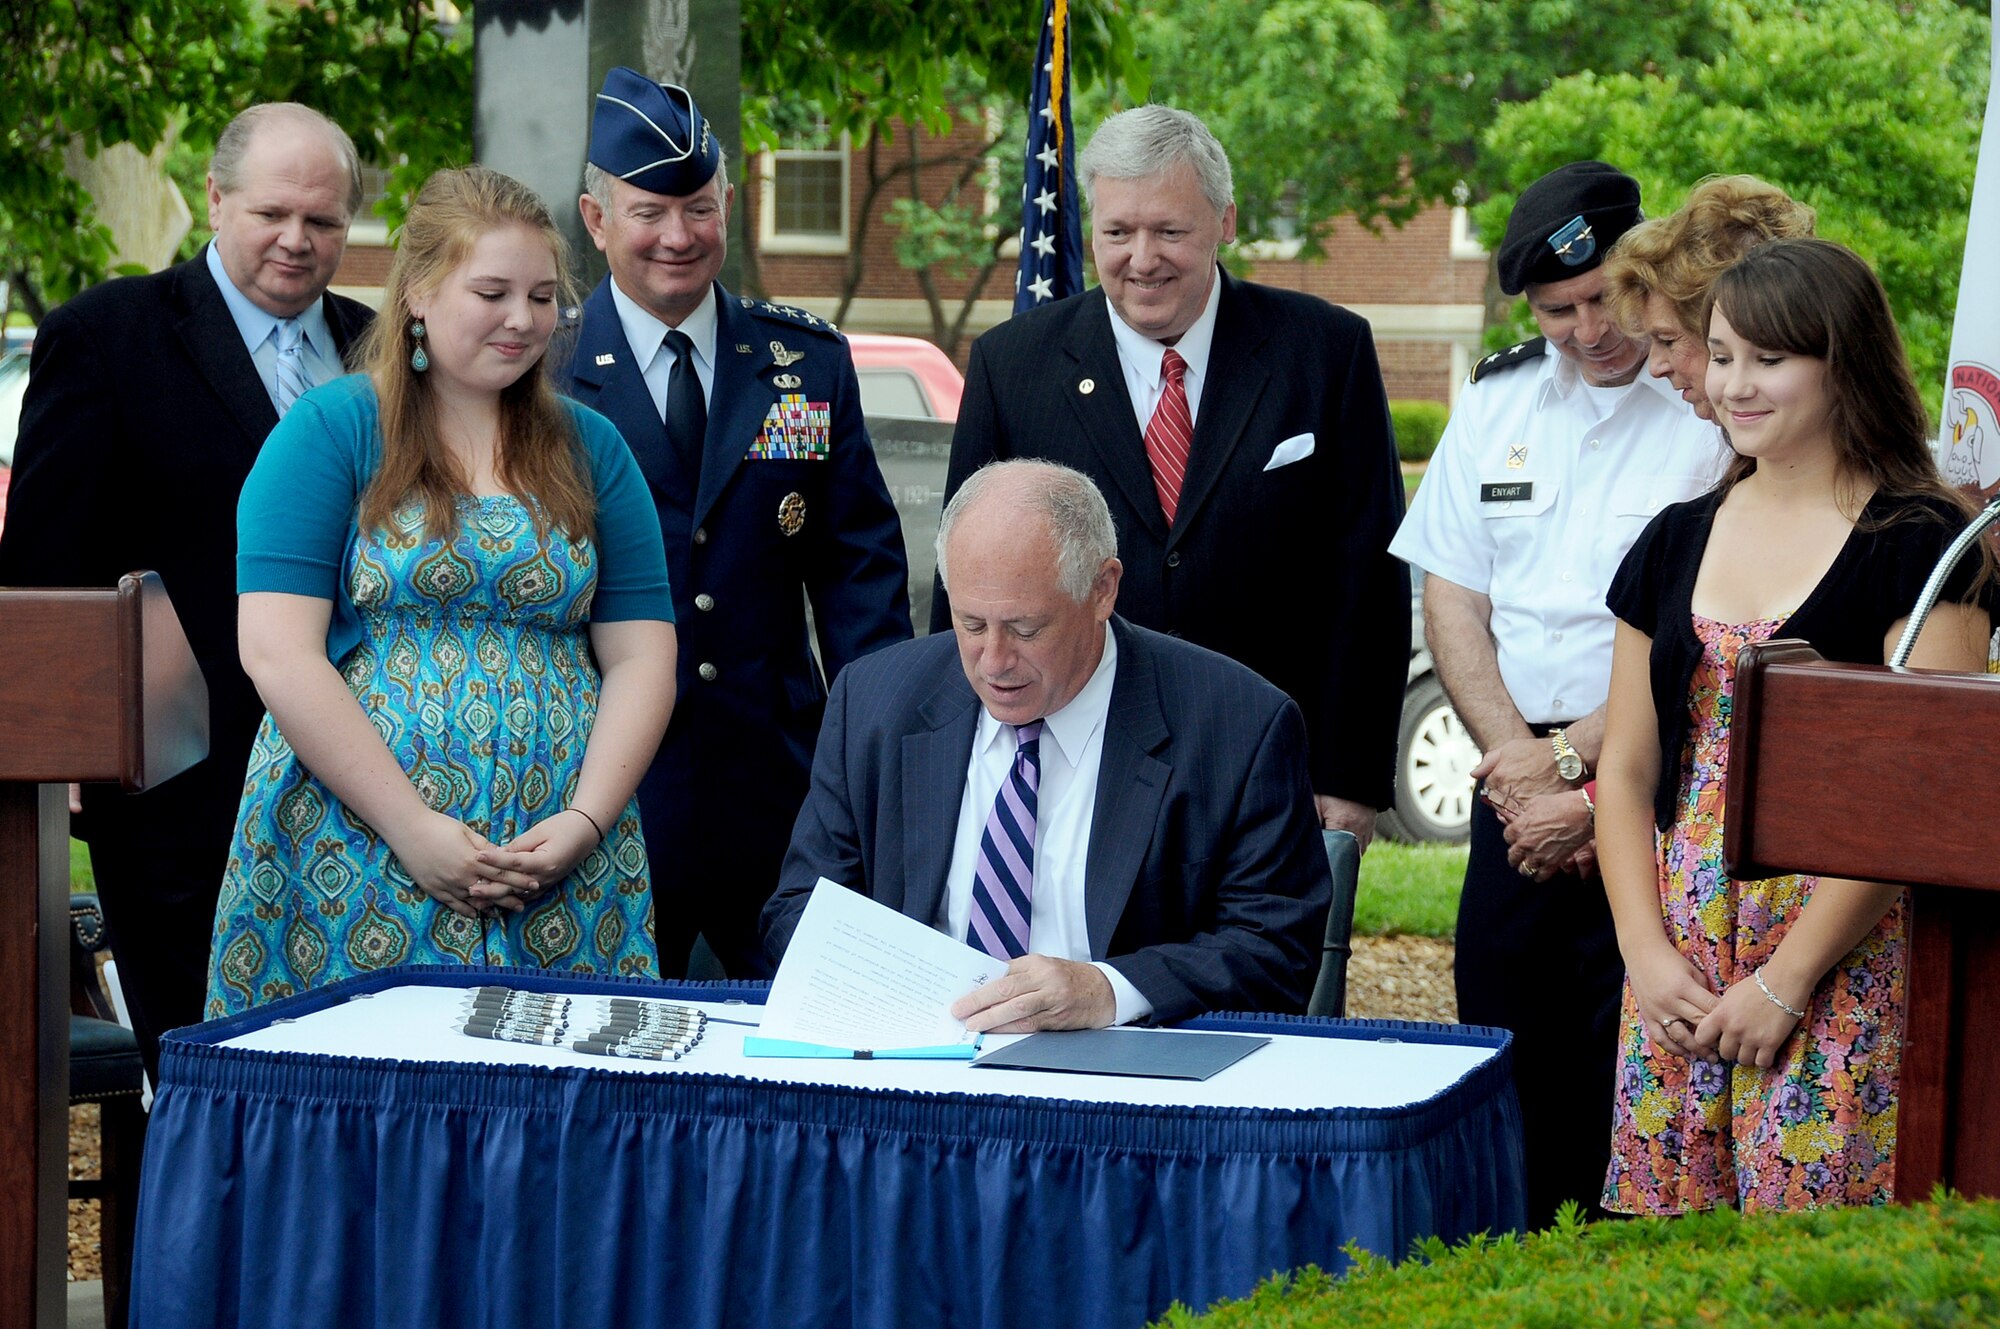 Illinois Gov. Pat Quinn signs the Intestate Compact on Education Opportunity for Military Children into law June 28, 2010, at Scott Air Force Base, Ill. Witnessing the signature are Illinois State Rep. Thomas Holbrook, family member Claire Krebs, commander of U.S. Transportation Command Gen. Duncan J. McNabb, Senior State Liaison for the Department of Defense Thomas Hinton, Adjutant General of the Illinois National Guard Maj. Gen. William Enyart, State Sen. Deanna Demuzio and family member Breanna Bence. (U.S. Transportation Command photo/Bob Fehringer)